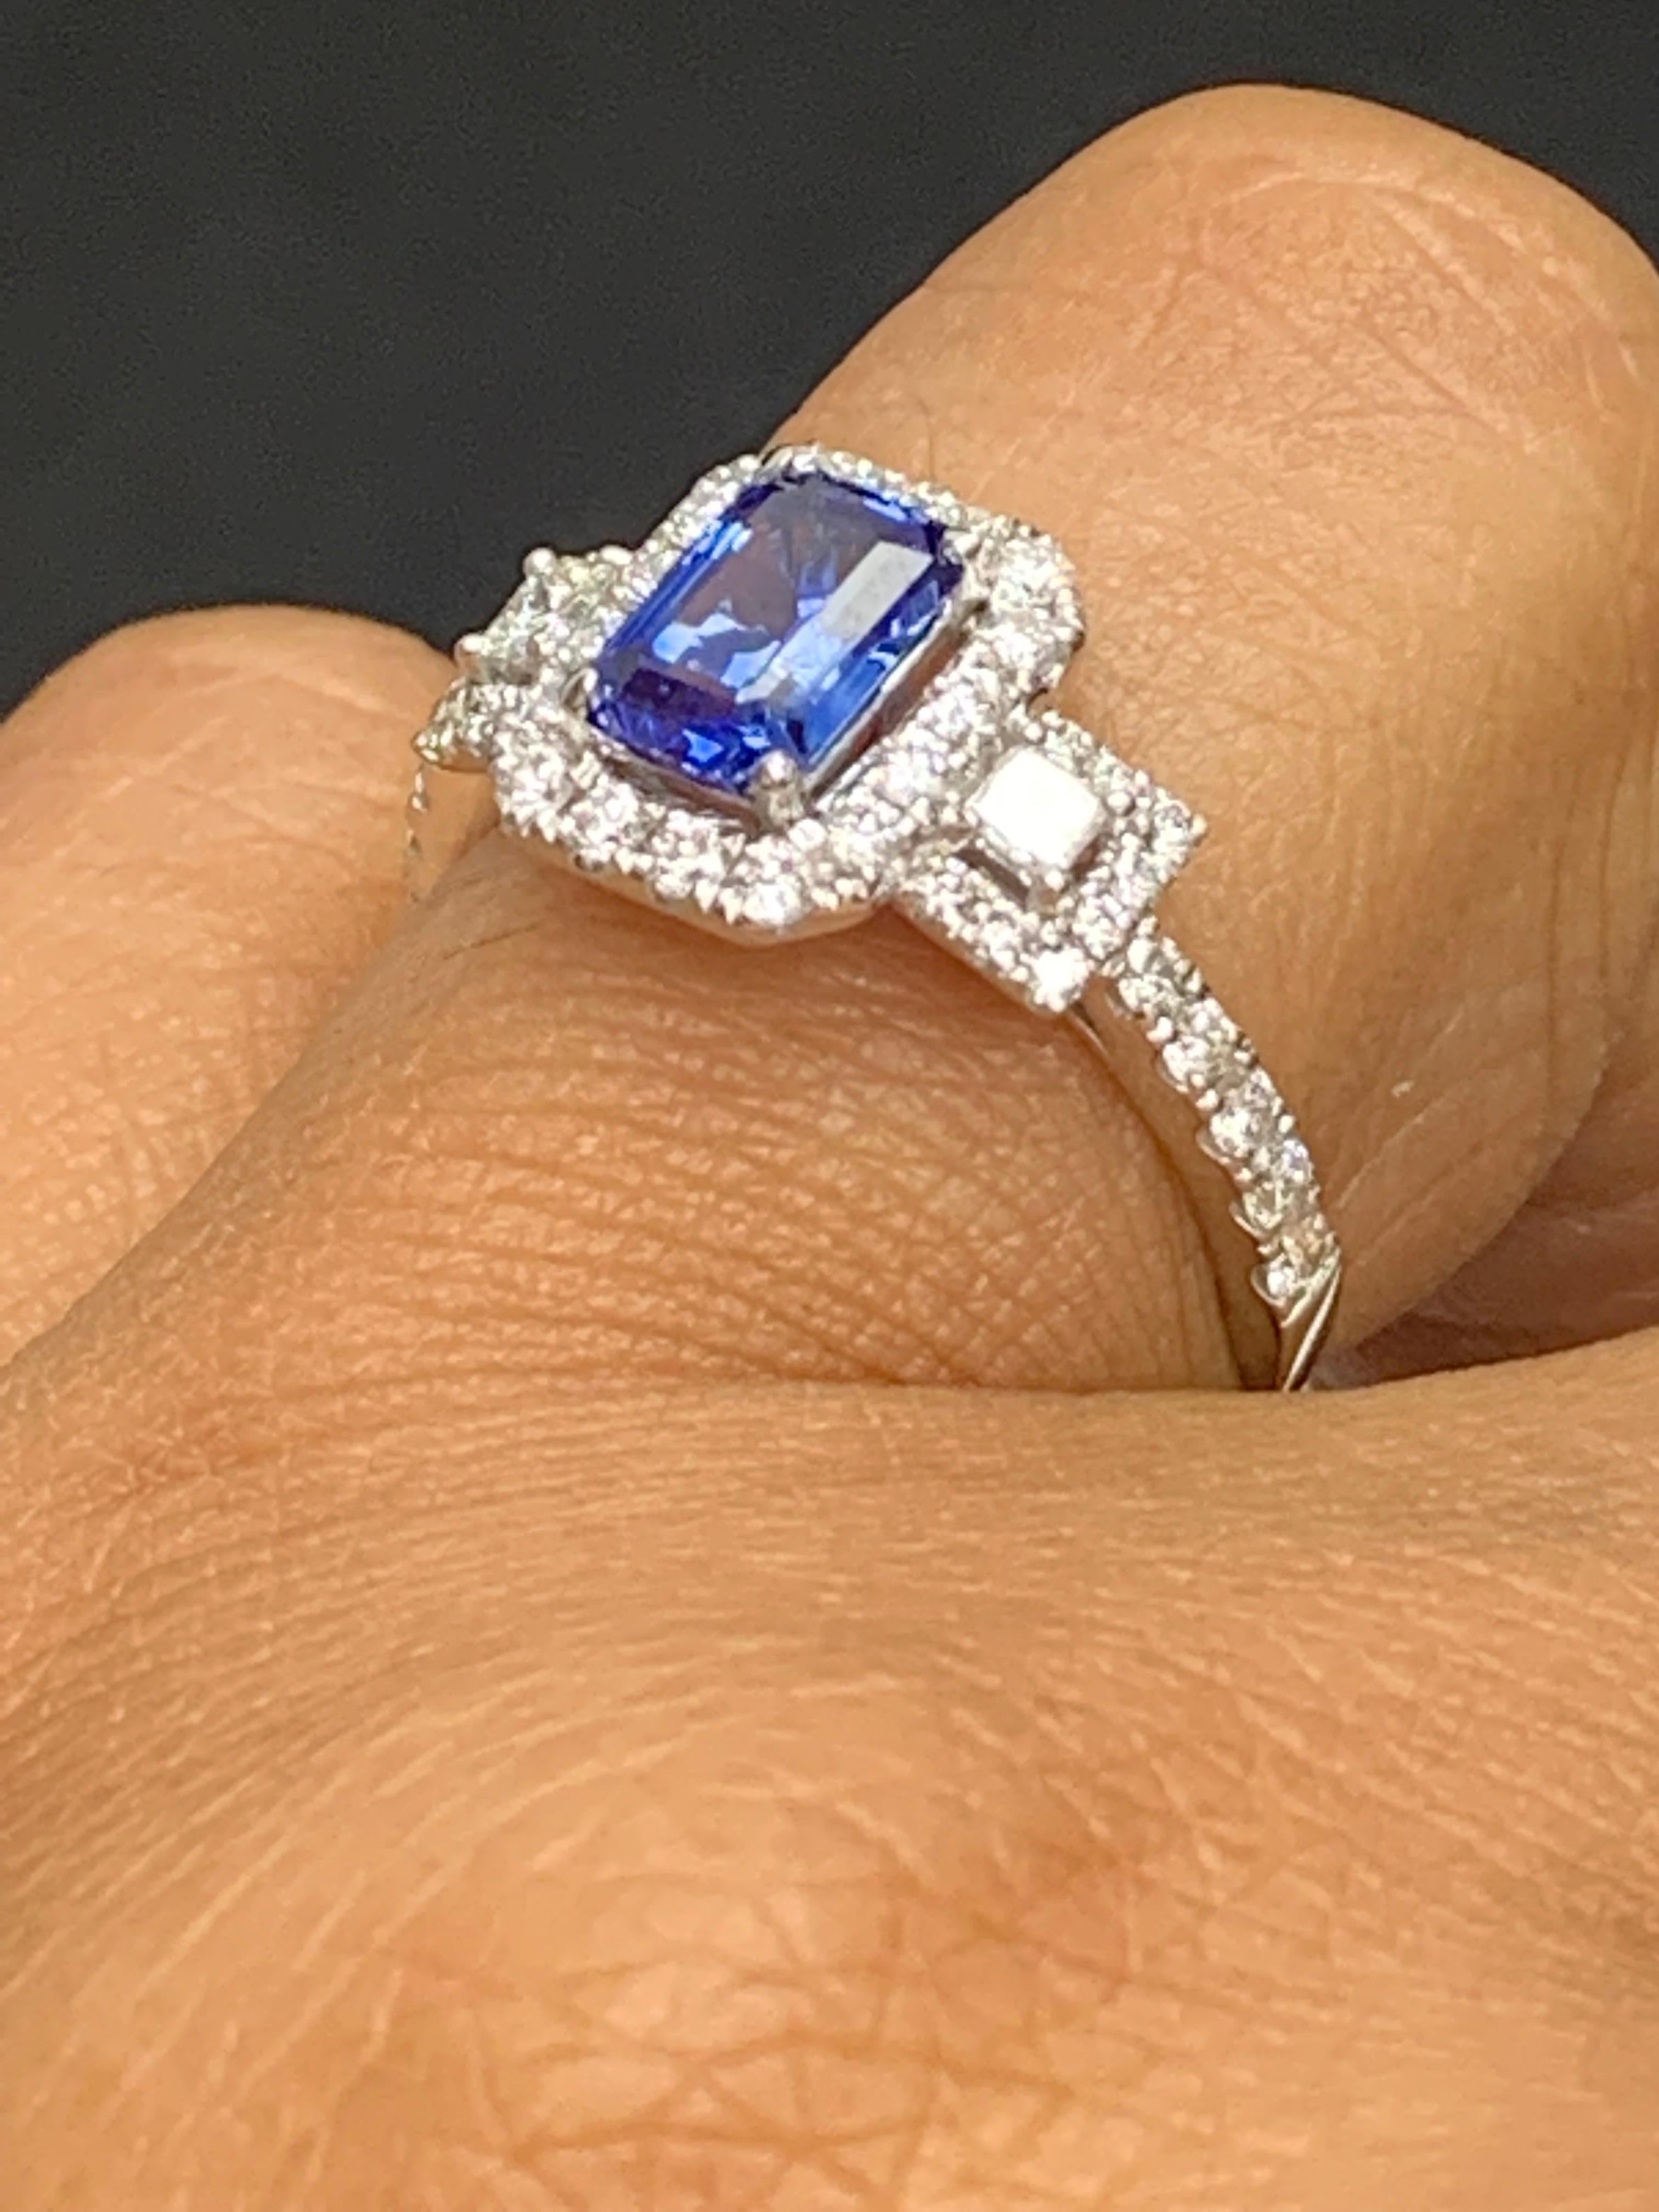 Modern 1.14 Carat Emerald Cut Sapphire and Diamond Halo Ring in 18K White Gold For Sale